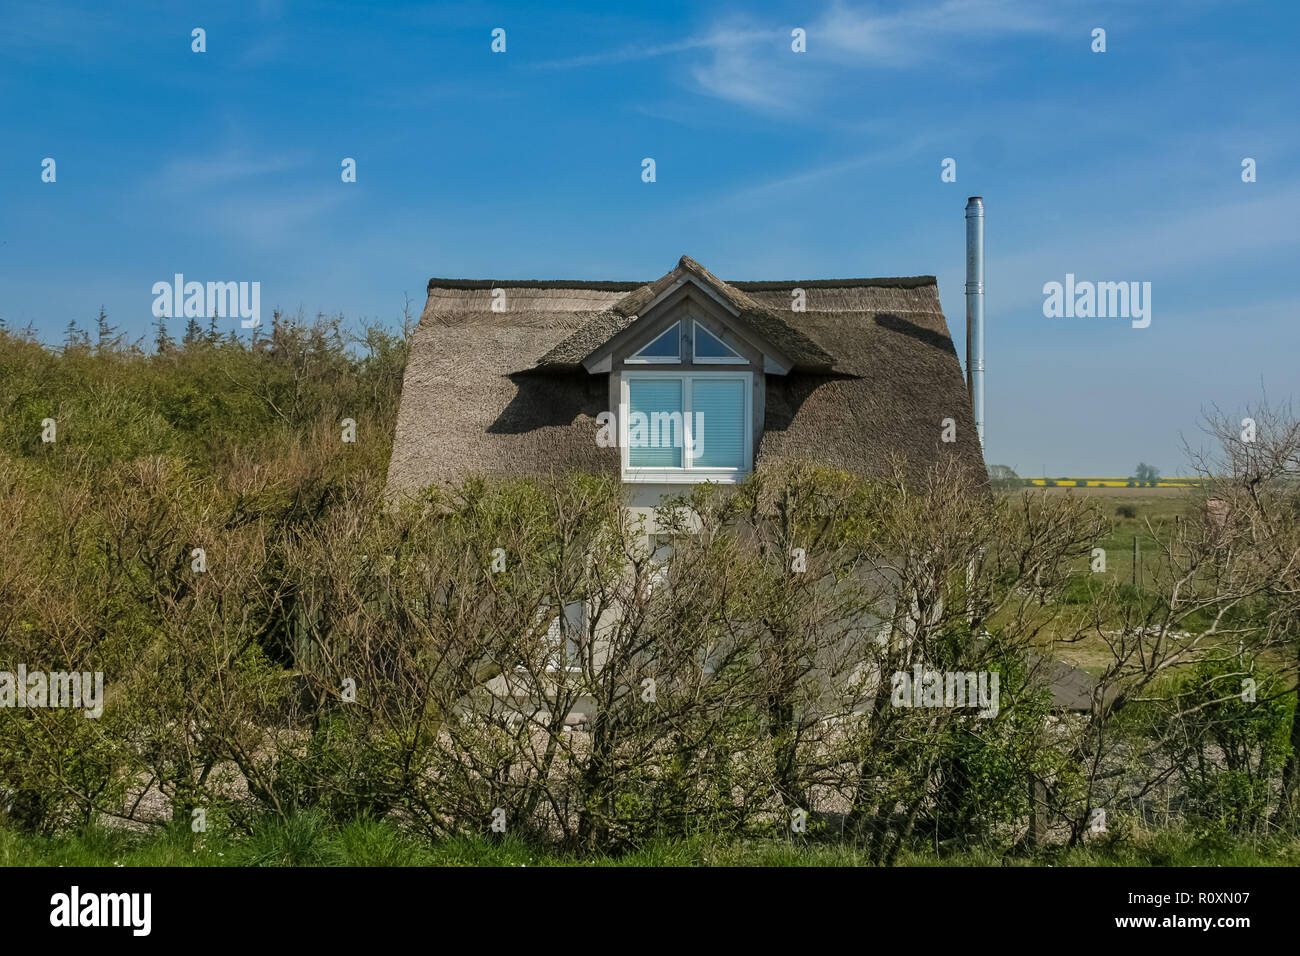 A small house with a dormer, a metal chimney and a typical traditional thatched roof made with dry water reed, is standing behind a shrub on a German... Stock Photo